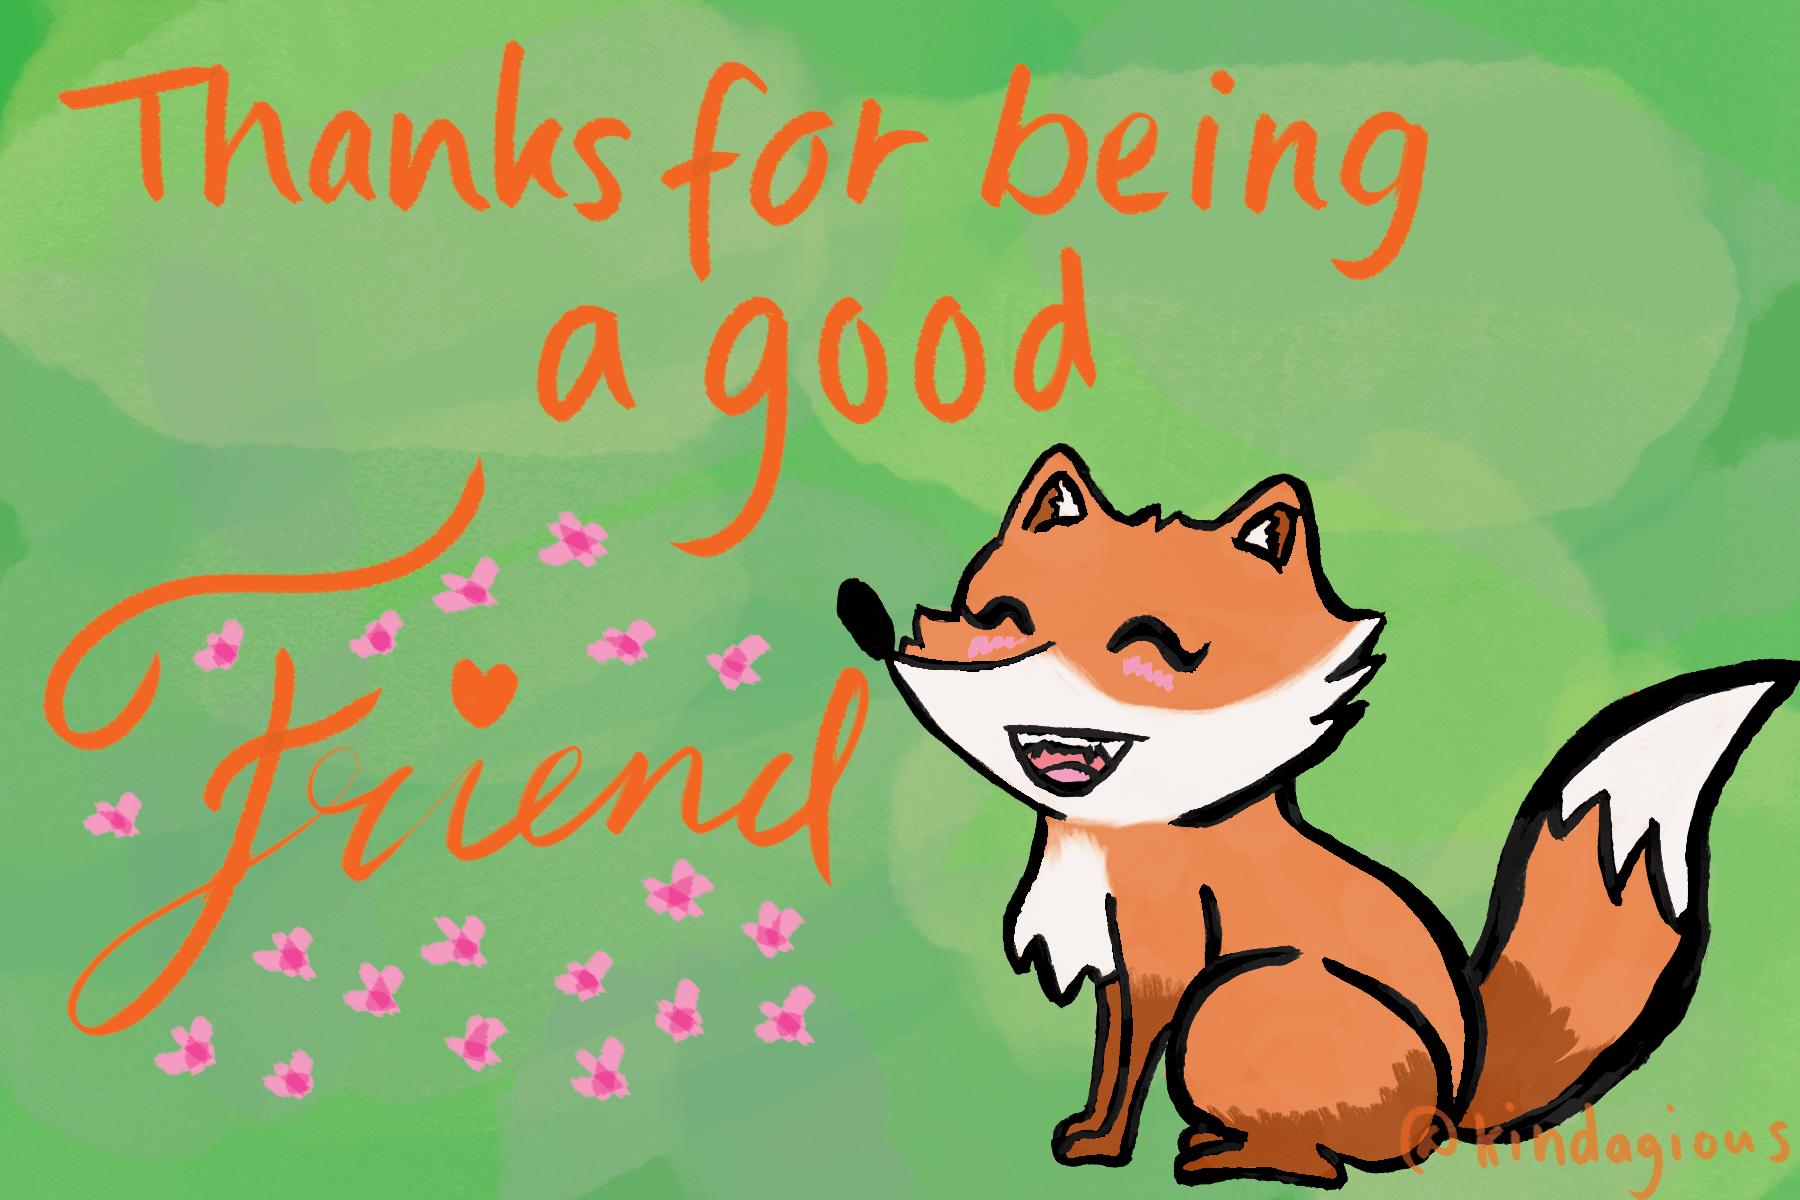 Thanks for being a good friend!